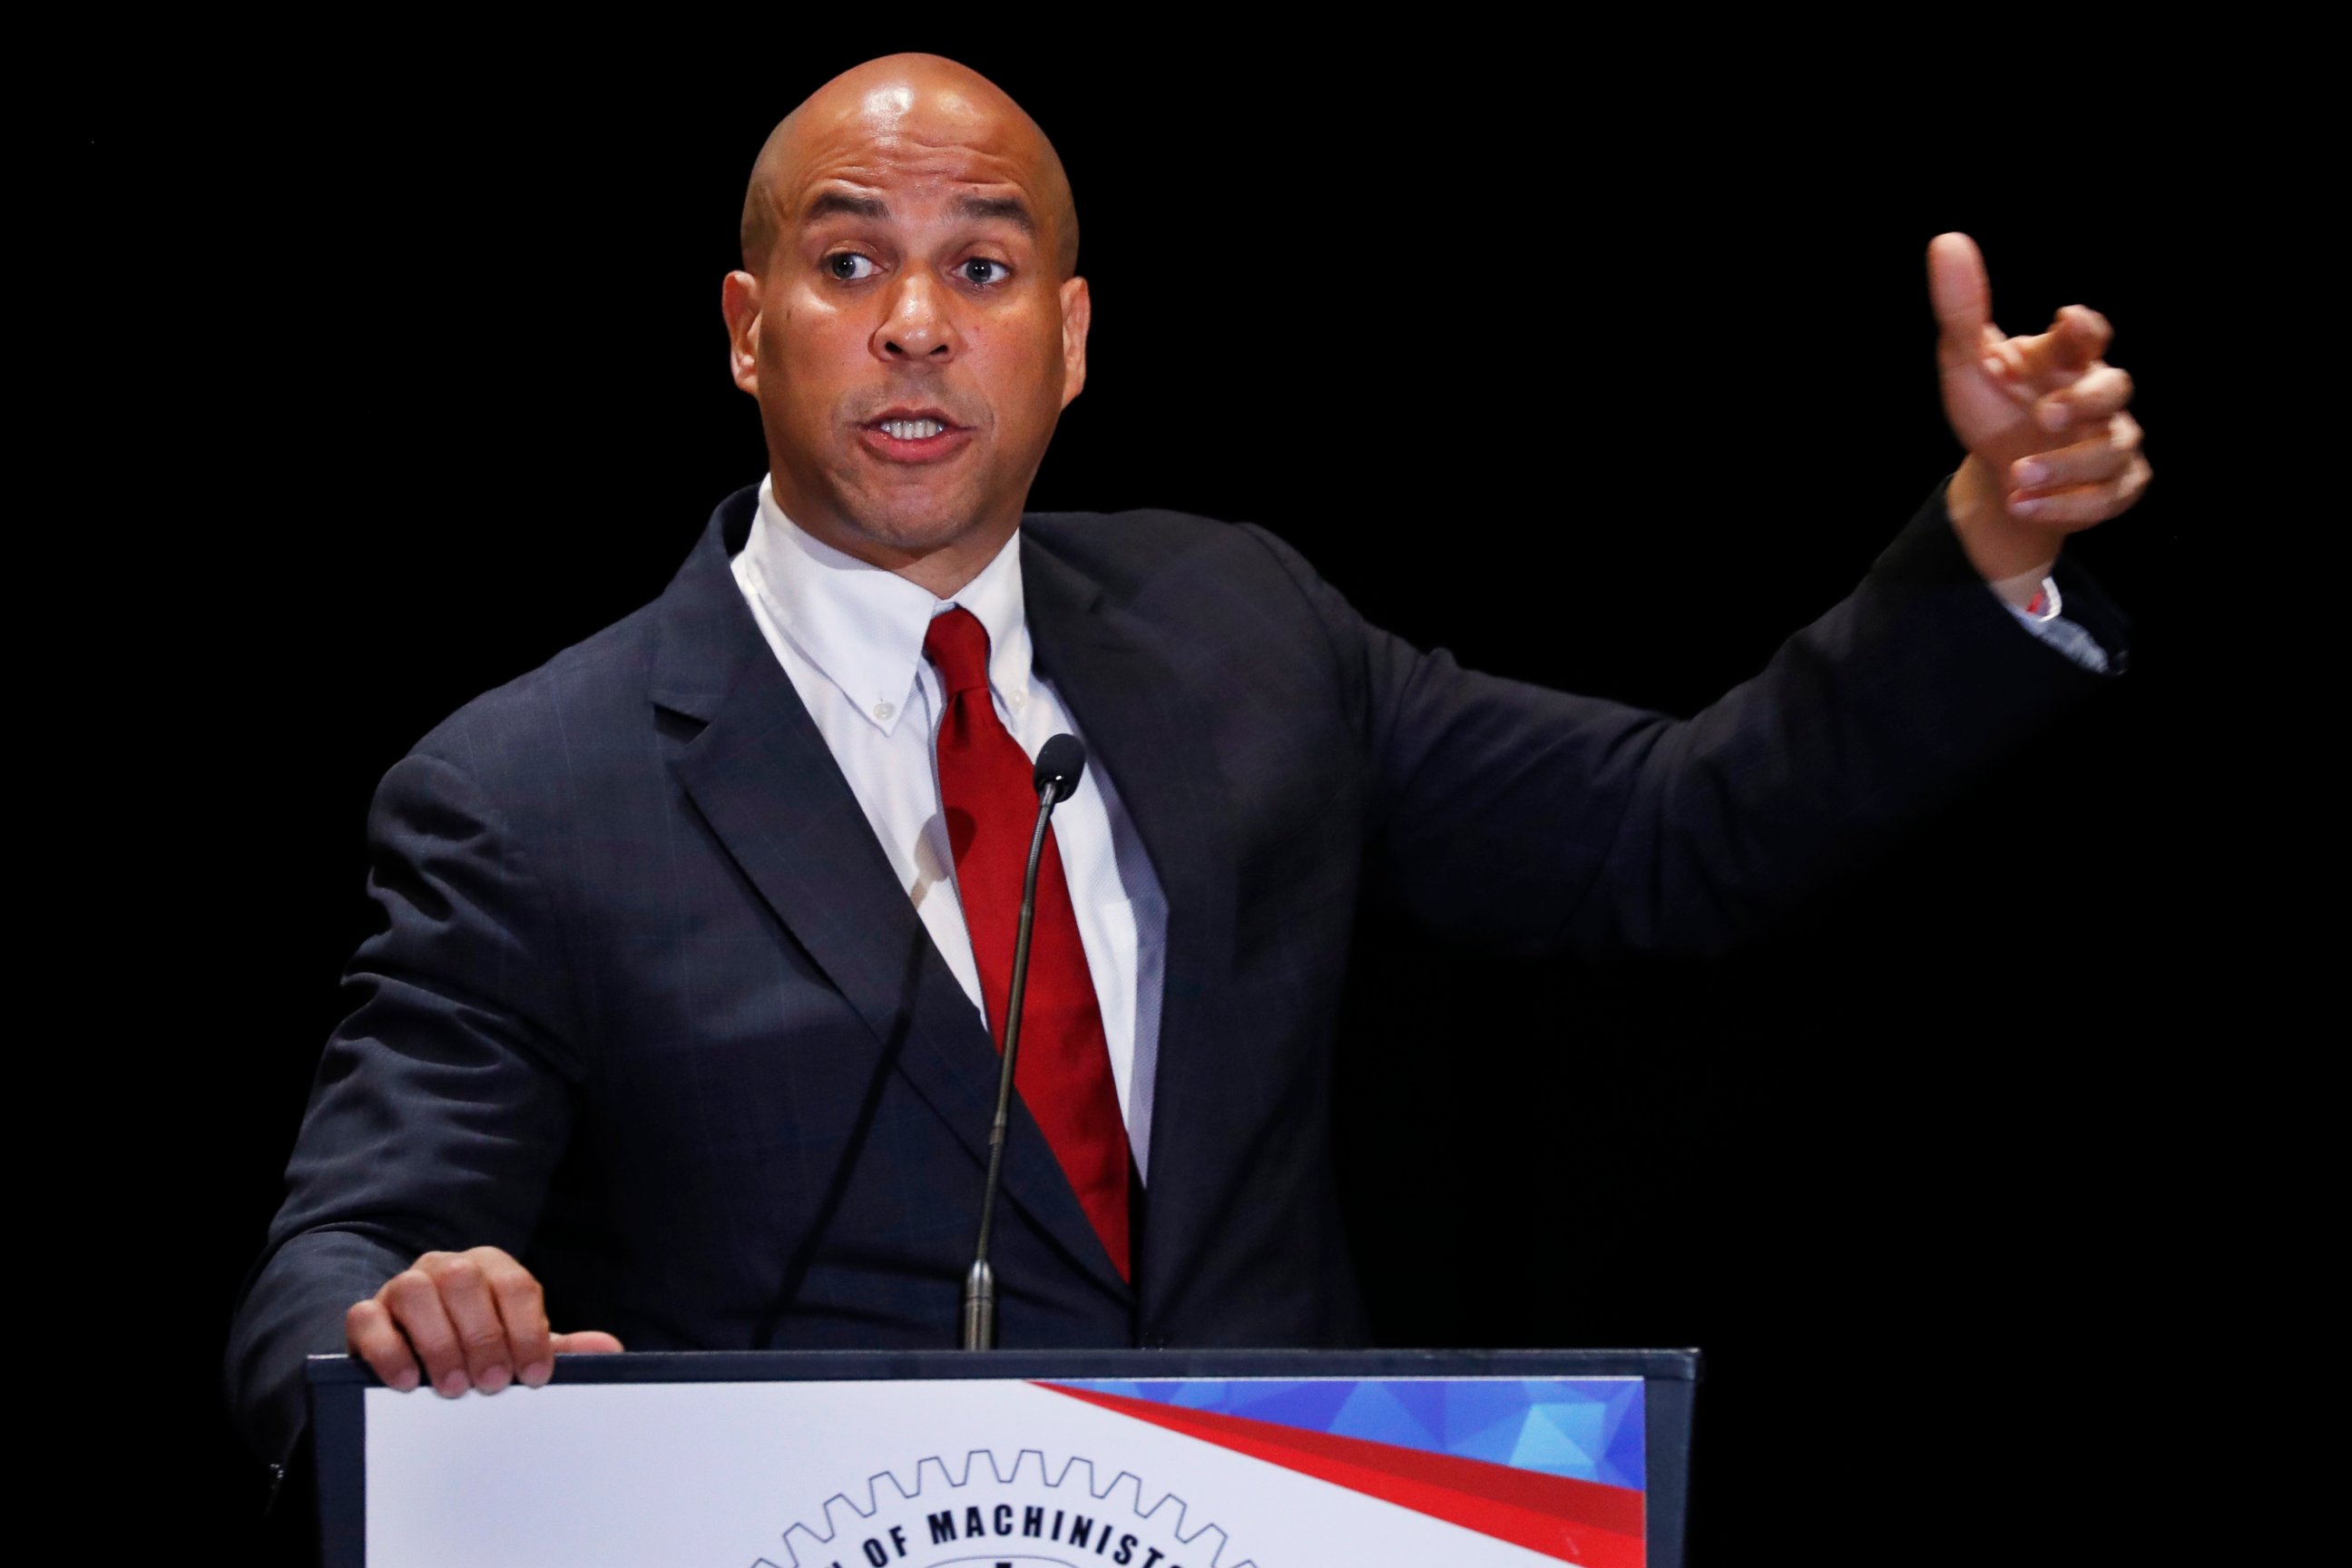 Democratic presidential candidate Sen. Cory Booker, D-N.J., speaks during the Machinists Union Legislative Conference, Tuesday May 7, 2019, in Washington.